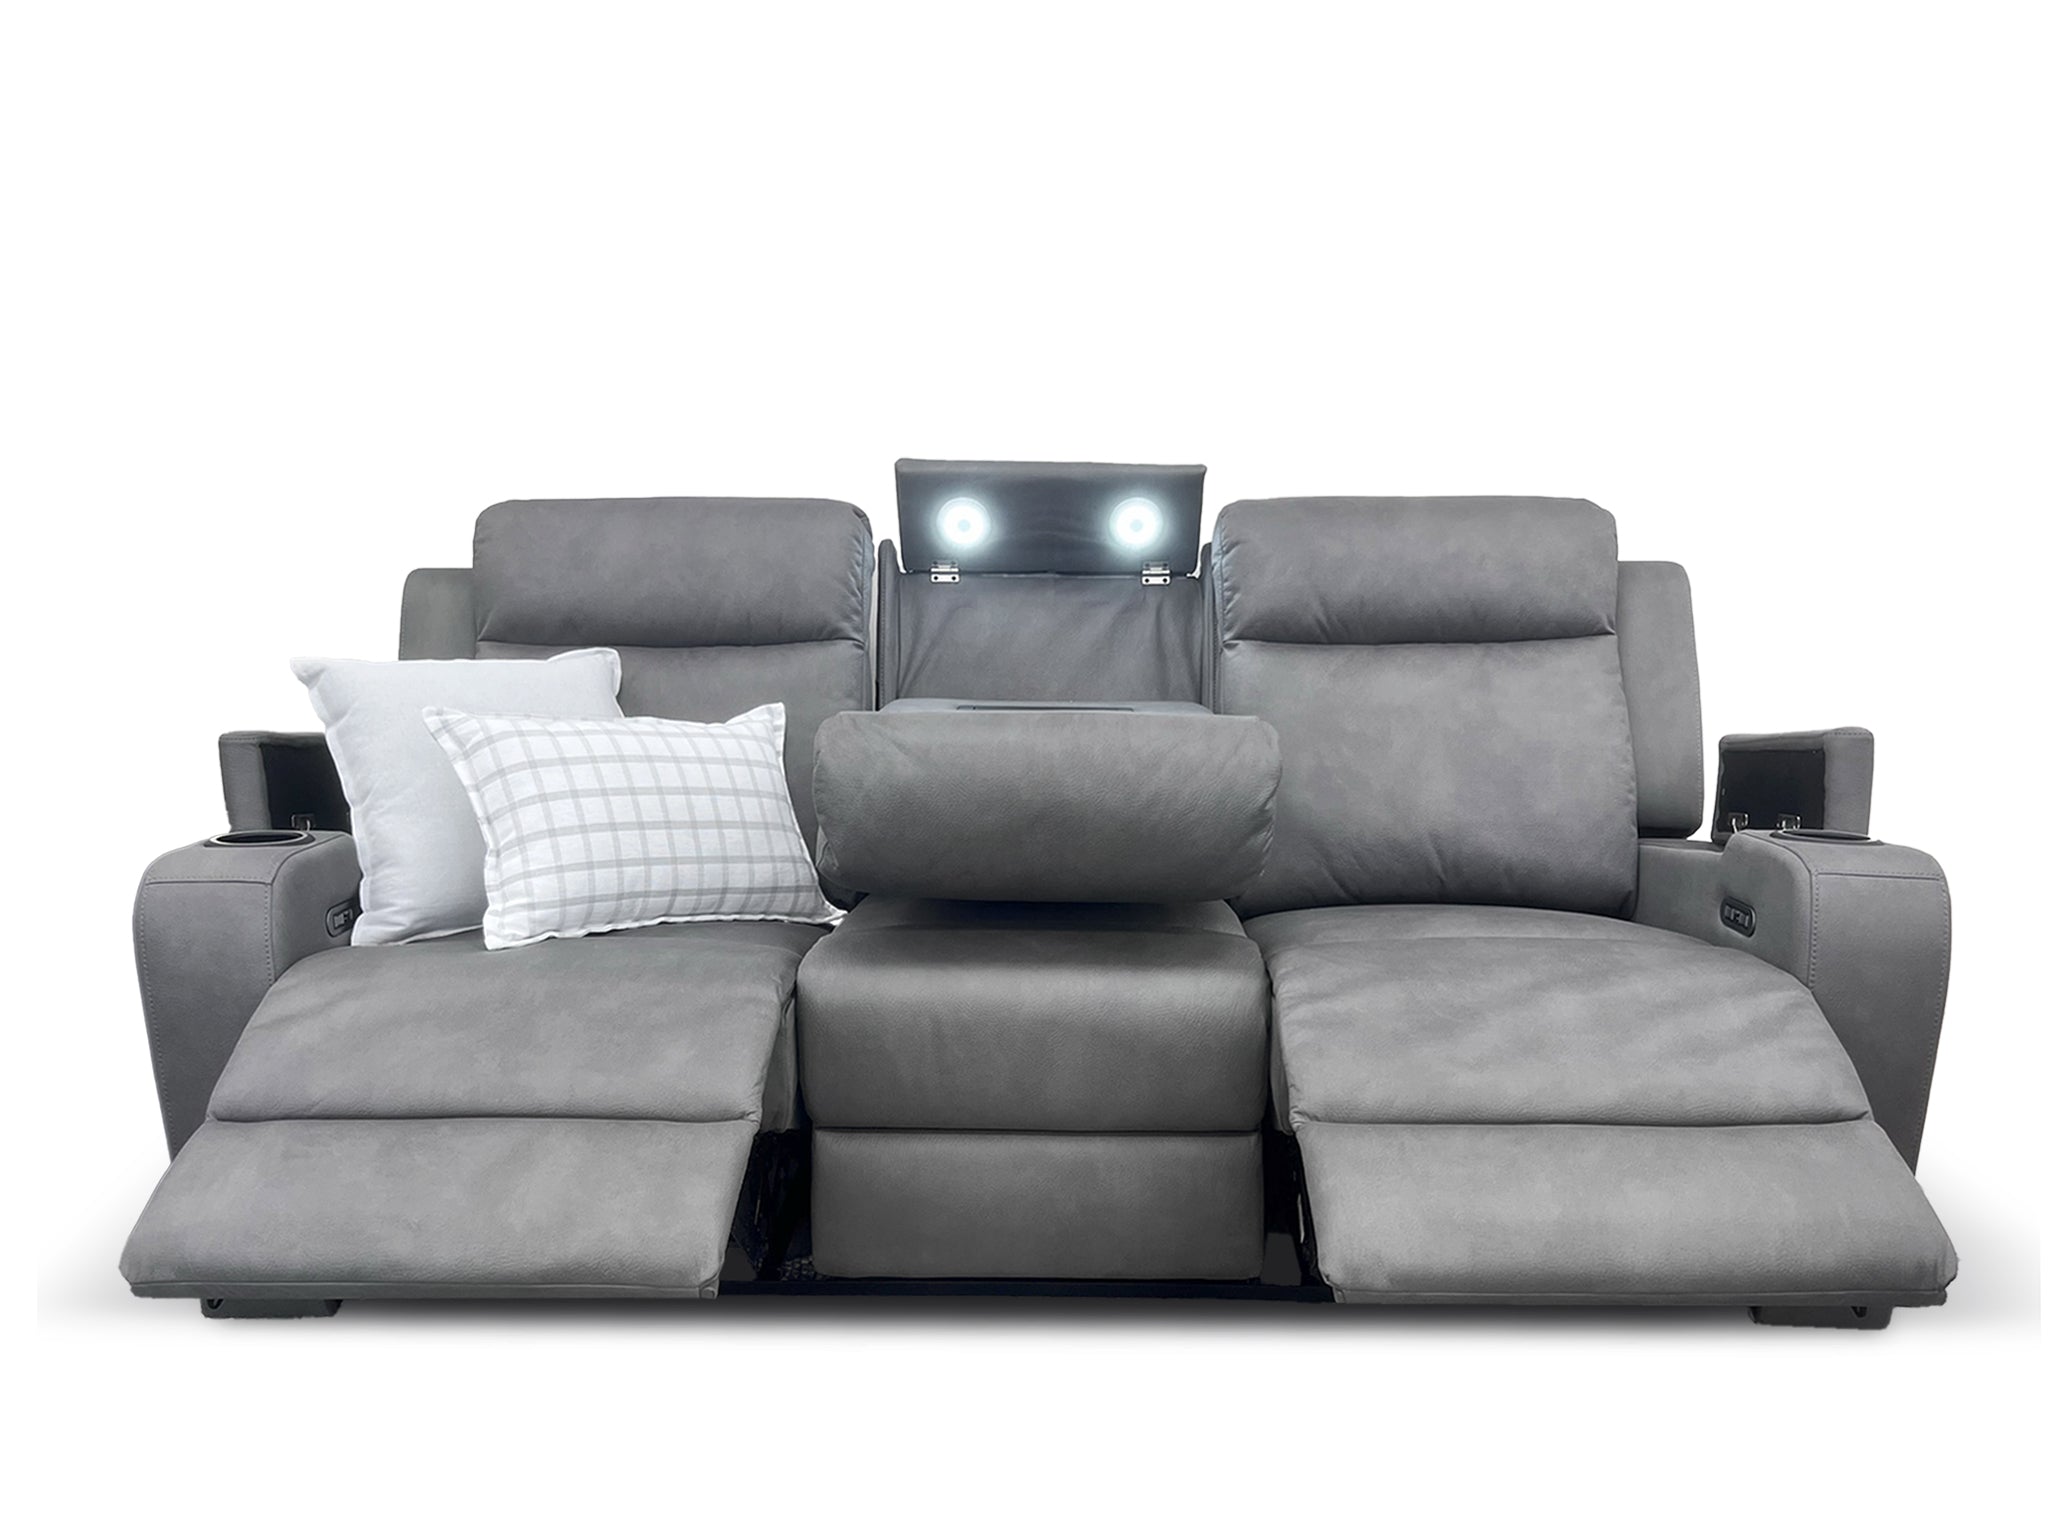 Cleo 3 seater with dual electric recliners in gunmetal